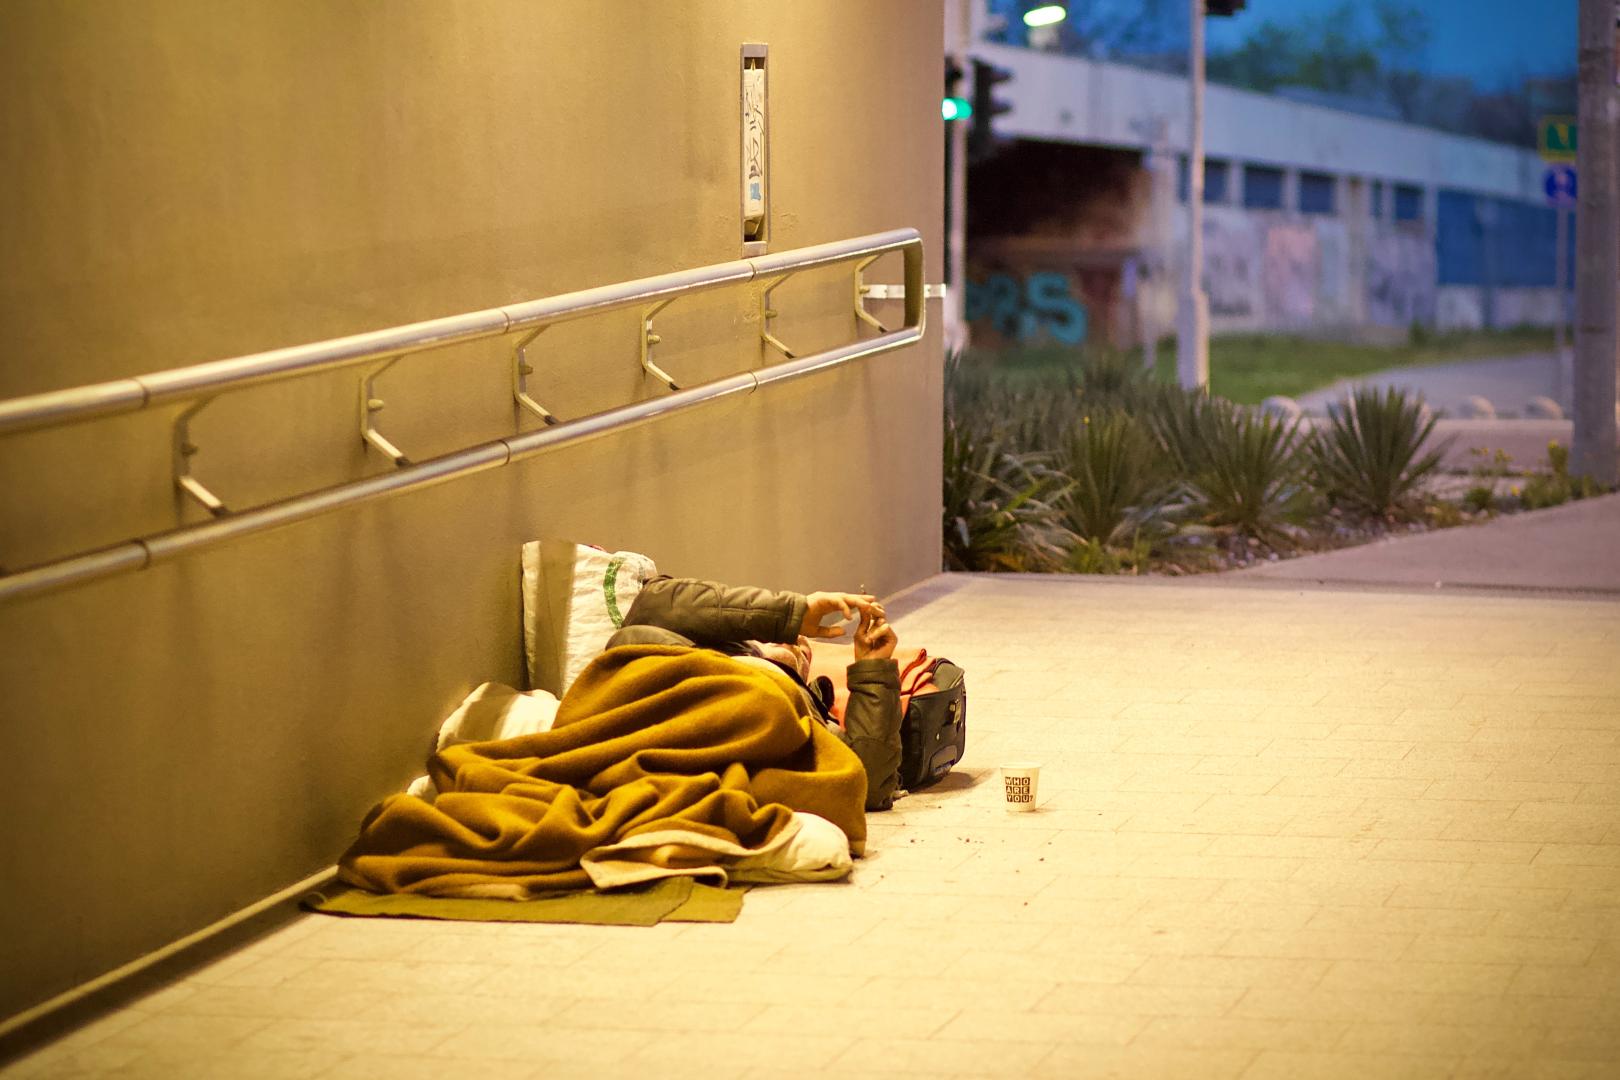 person sleeping rough under a blanket in a lit underpass